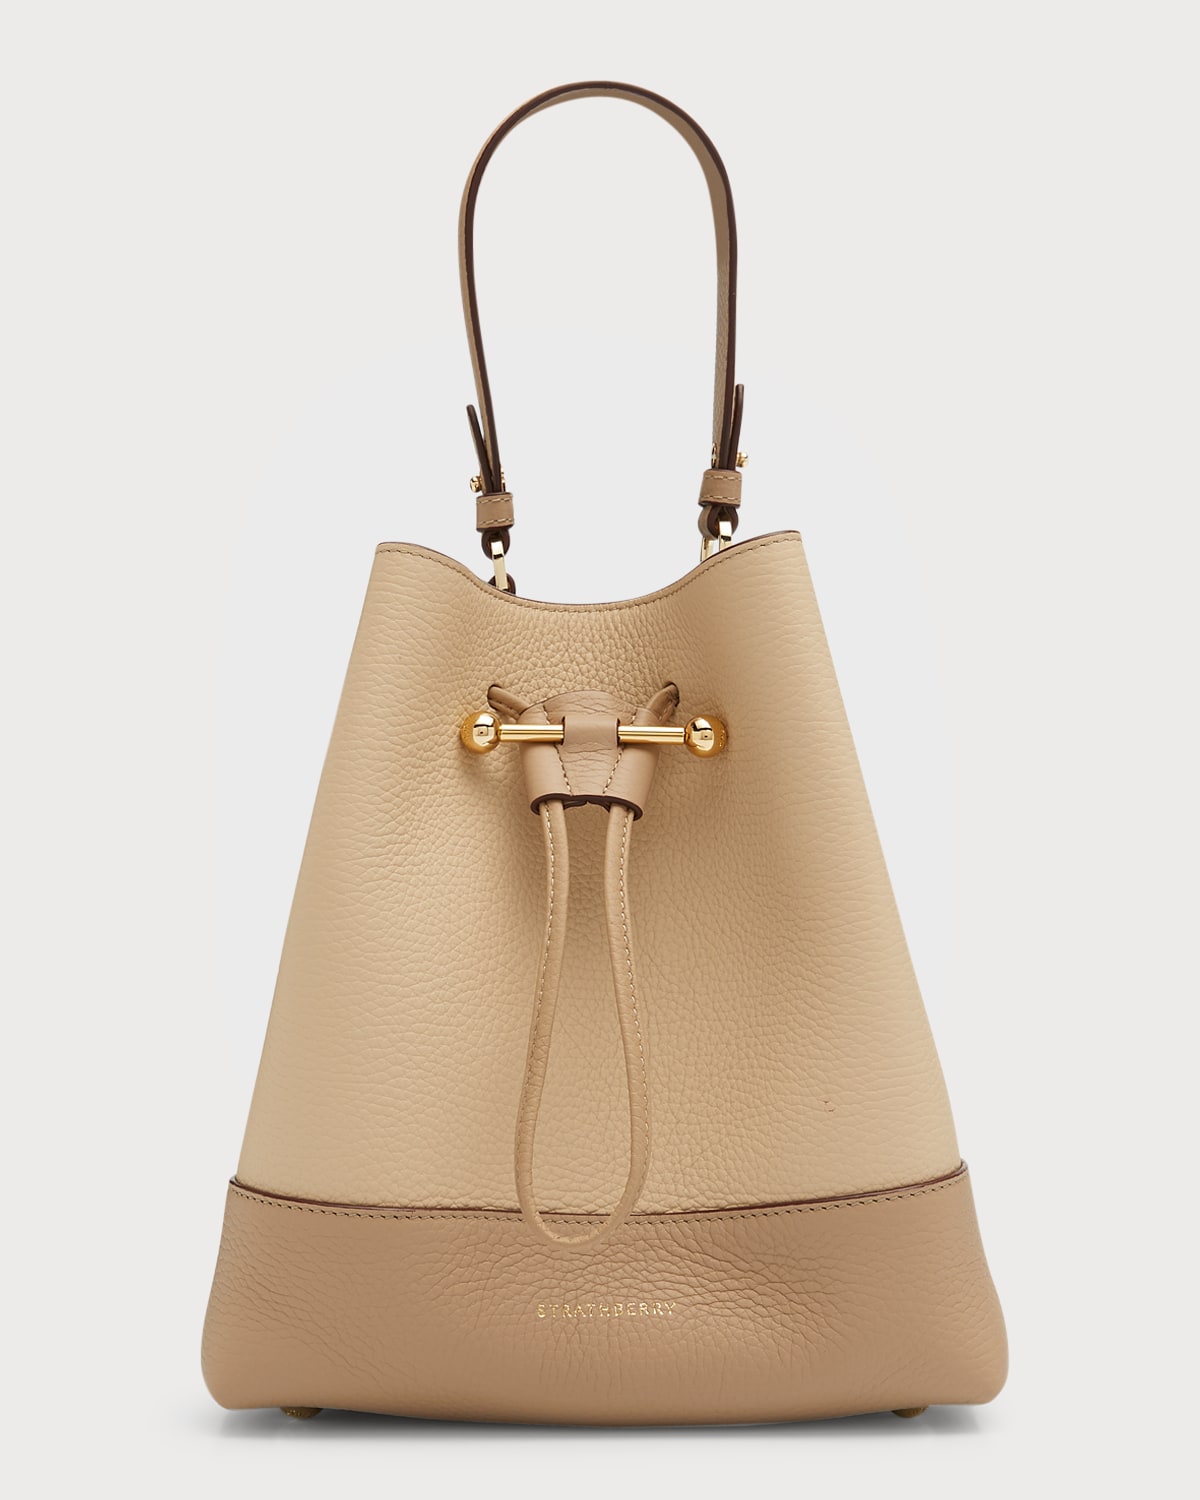 Strathberry - 💛 Lana Bucket Bag in Mushroom💛 Shop now at